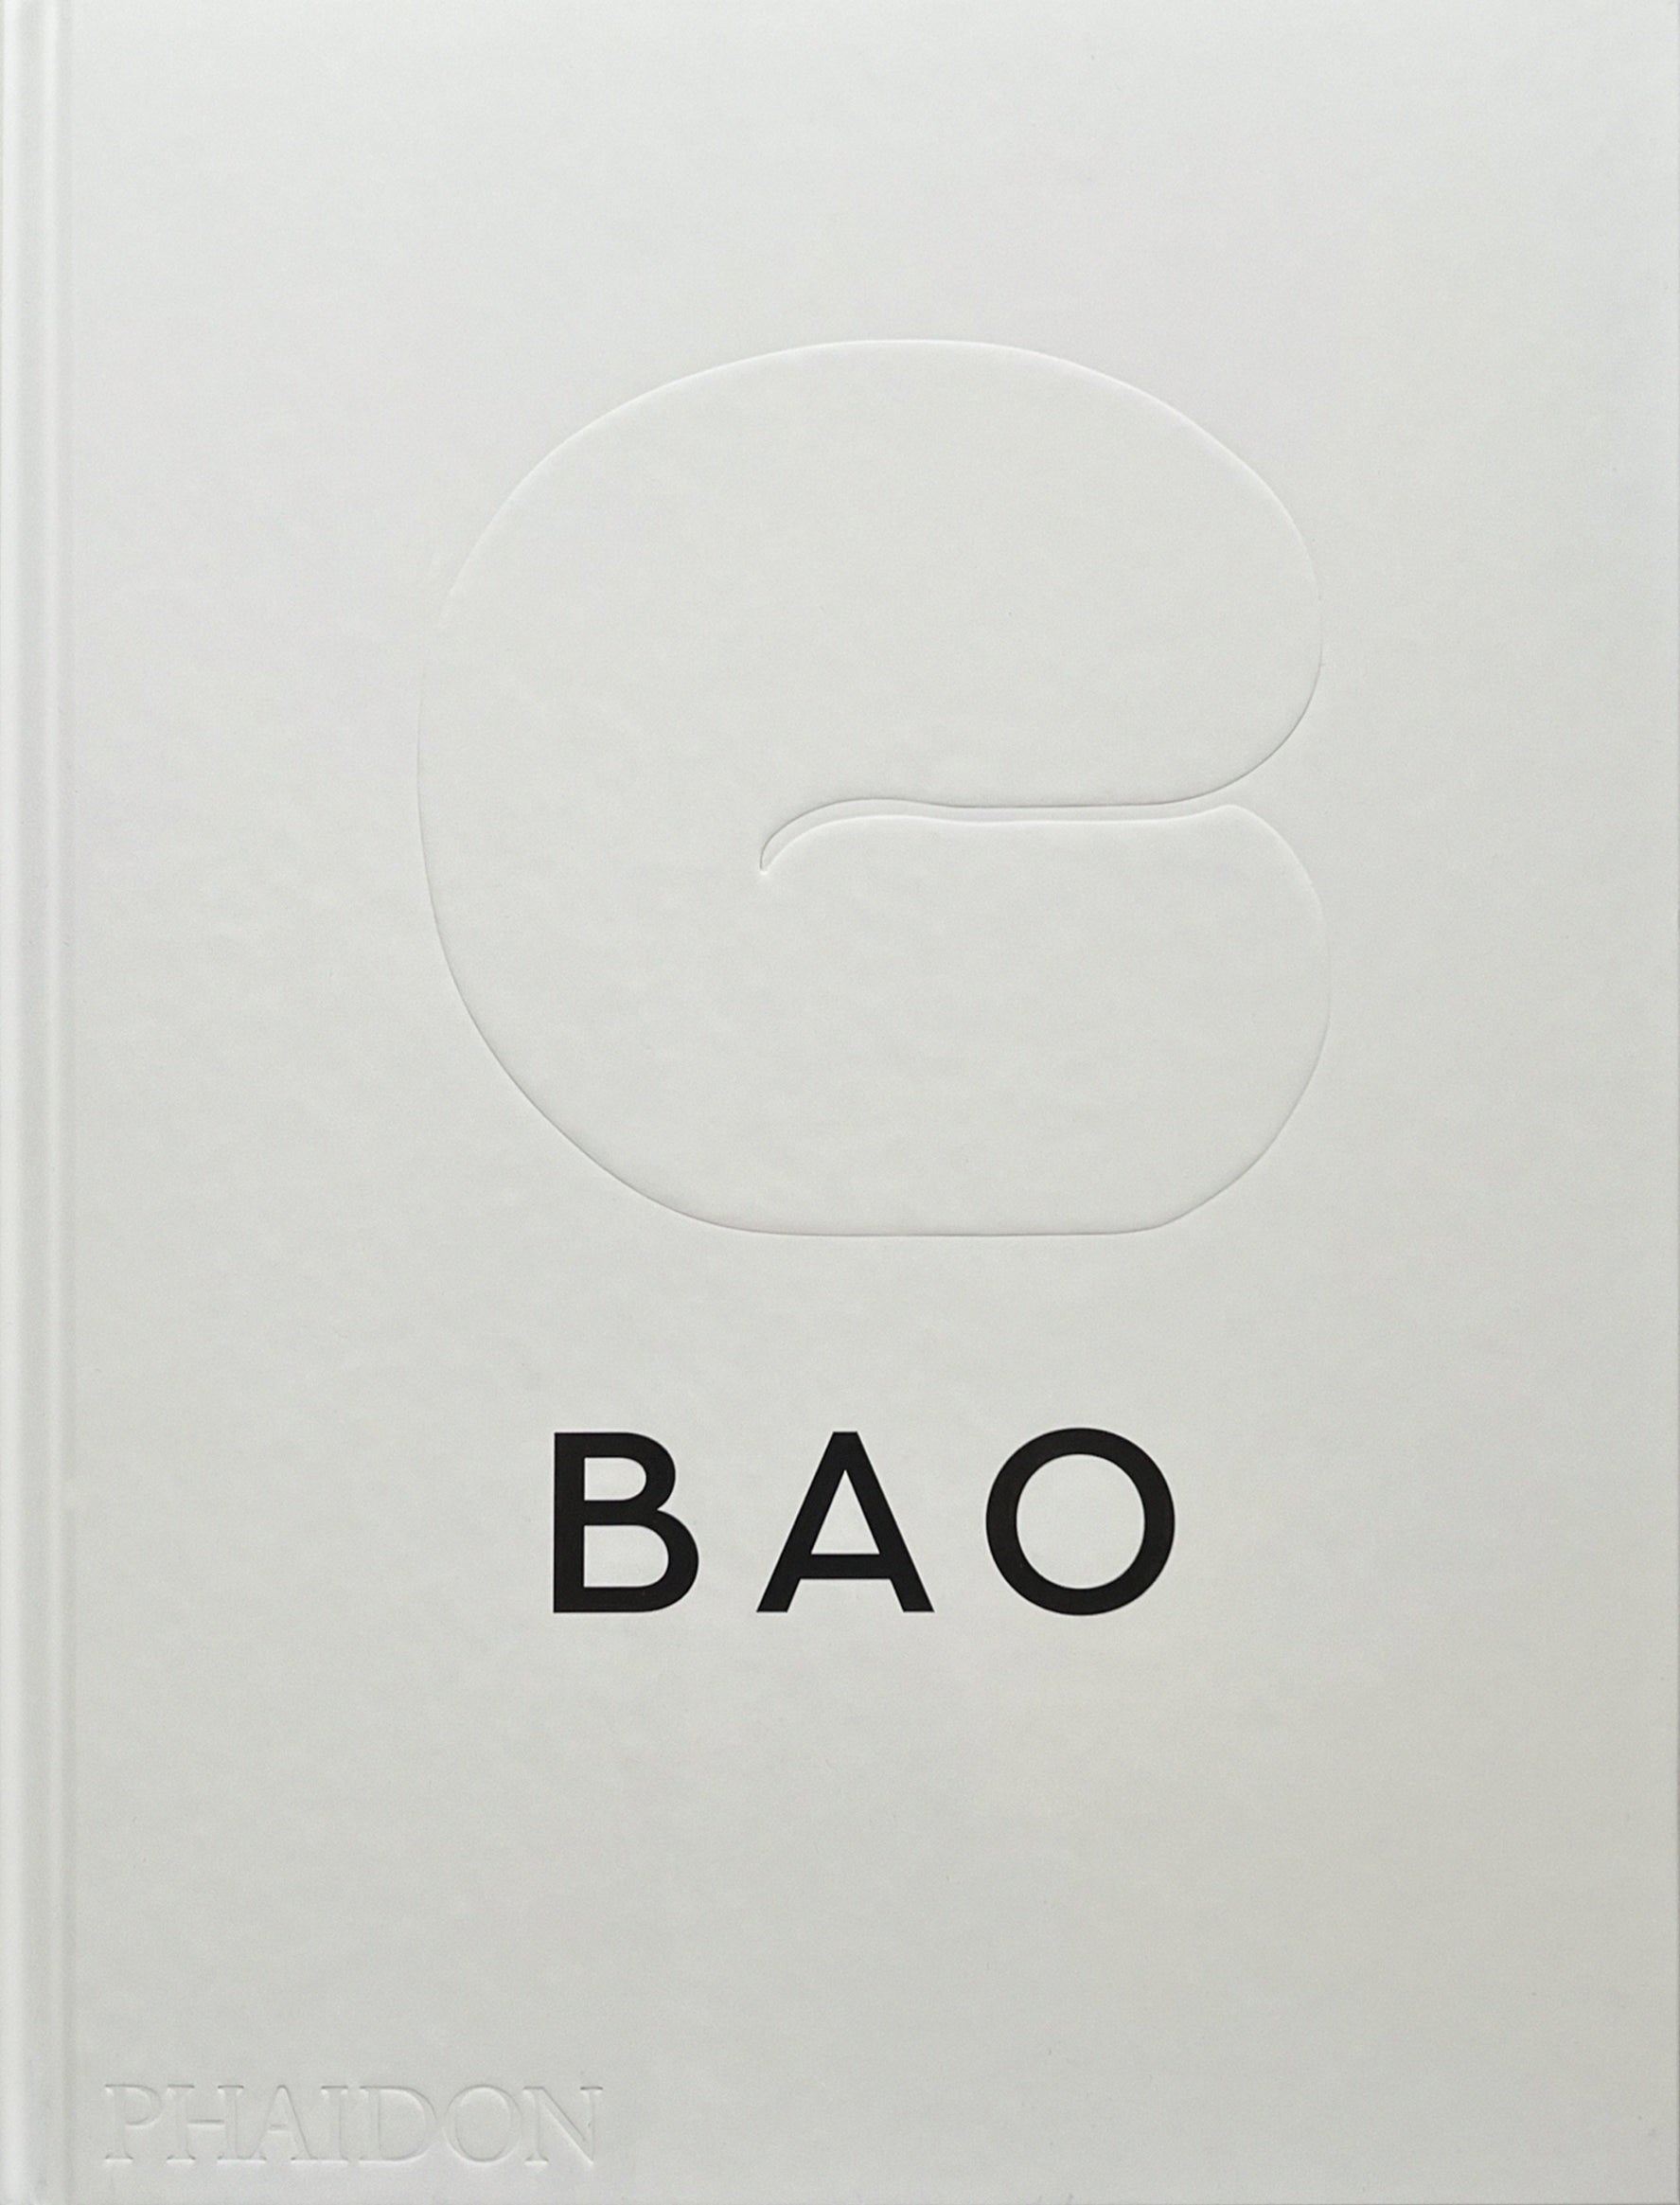 The first cookbook from London’s cult favorite restaurant BAO offers a taste of Taiwanese food culture